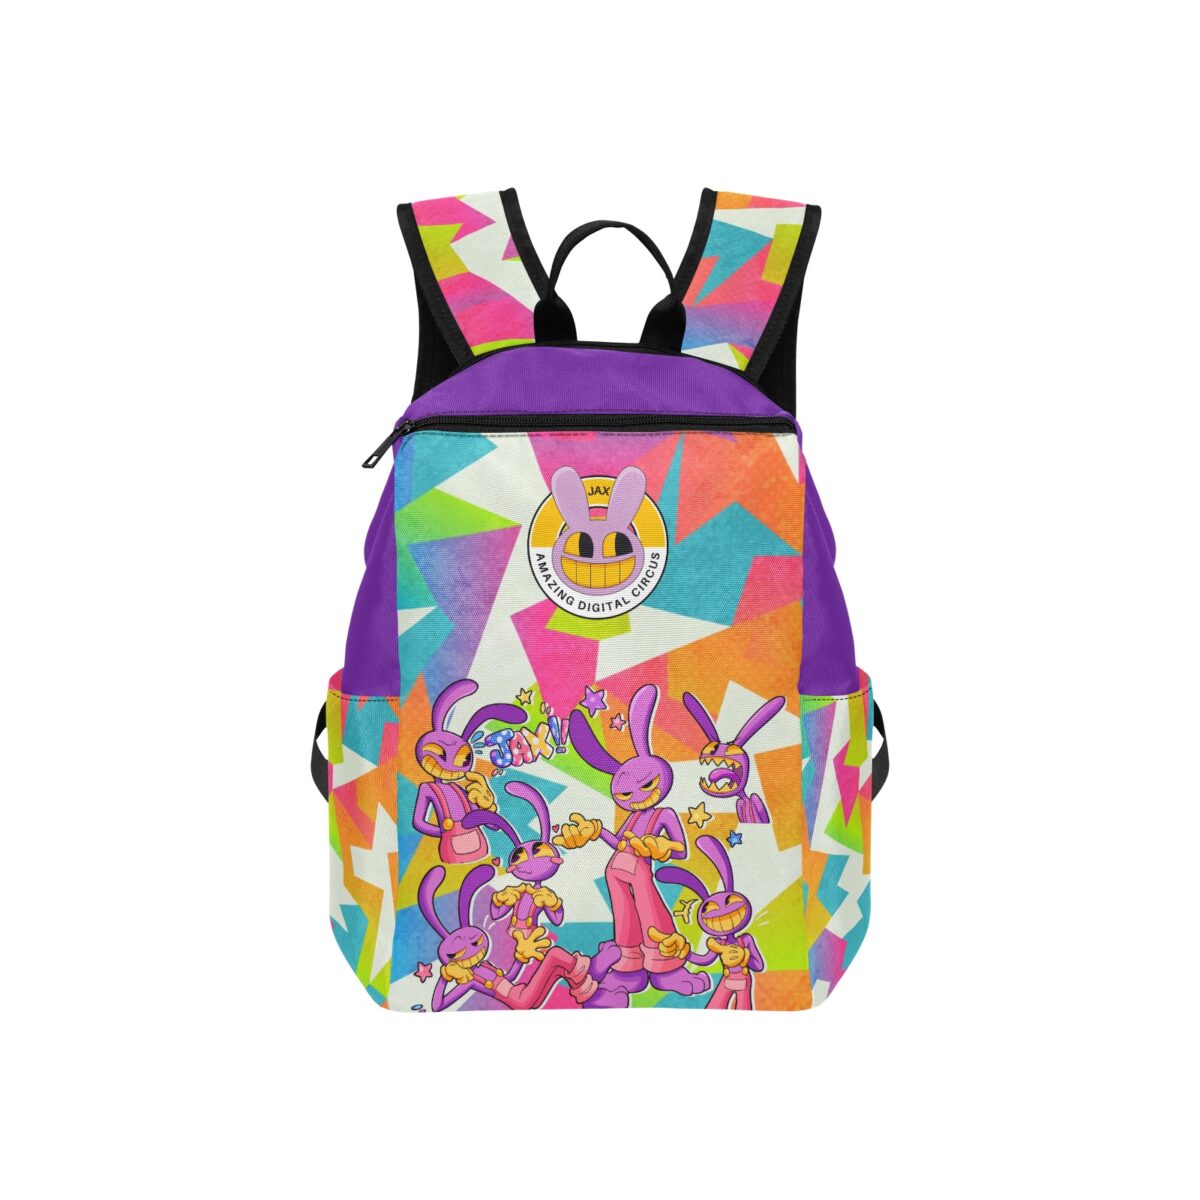 JAX Amazing Digital Circus Animated Series Character Backpack for School, Travel, Sports Book Bag Cool Kiddo 14